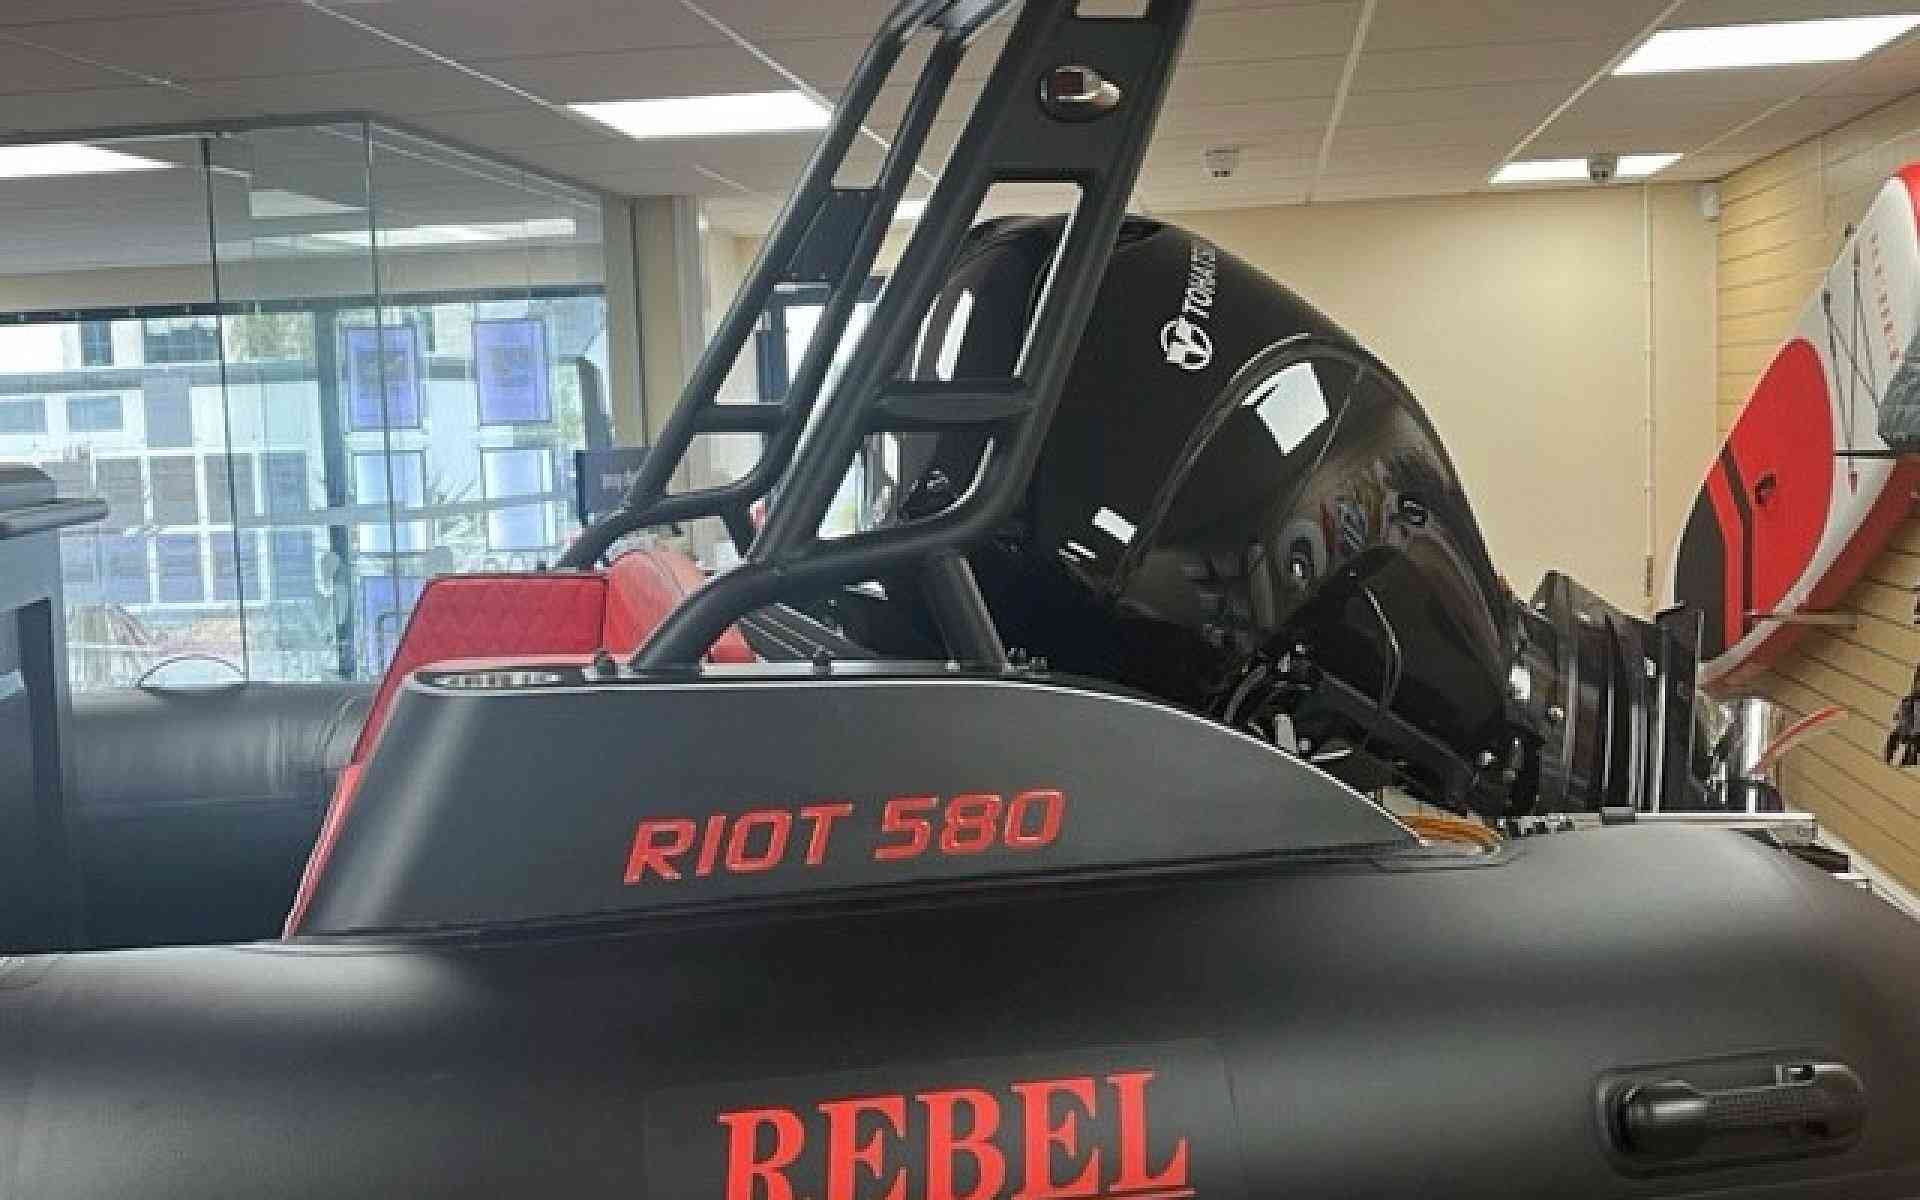 REBEL RIOT 580 RIB for sale in North Wales